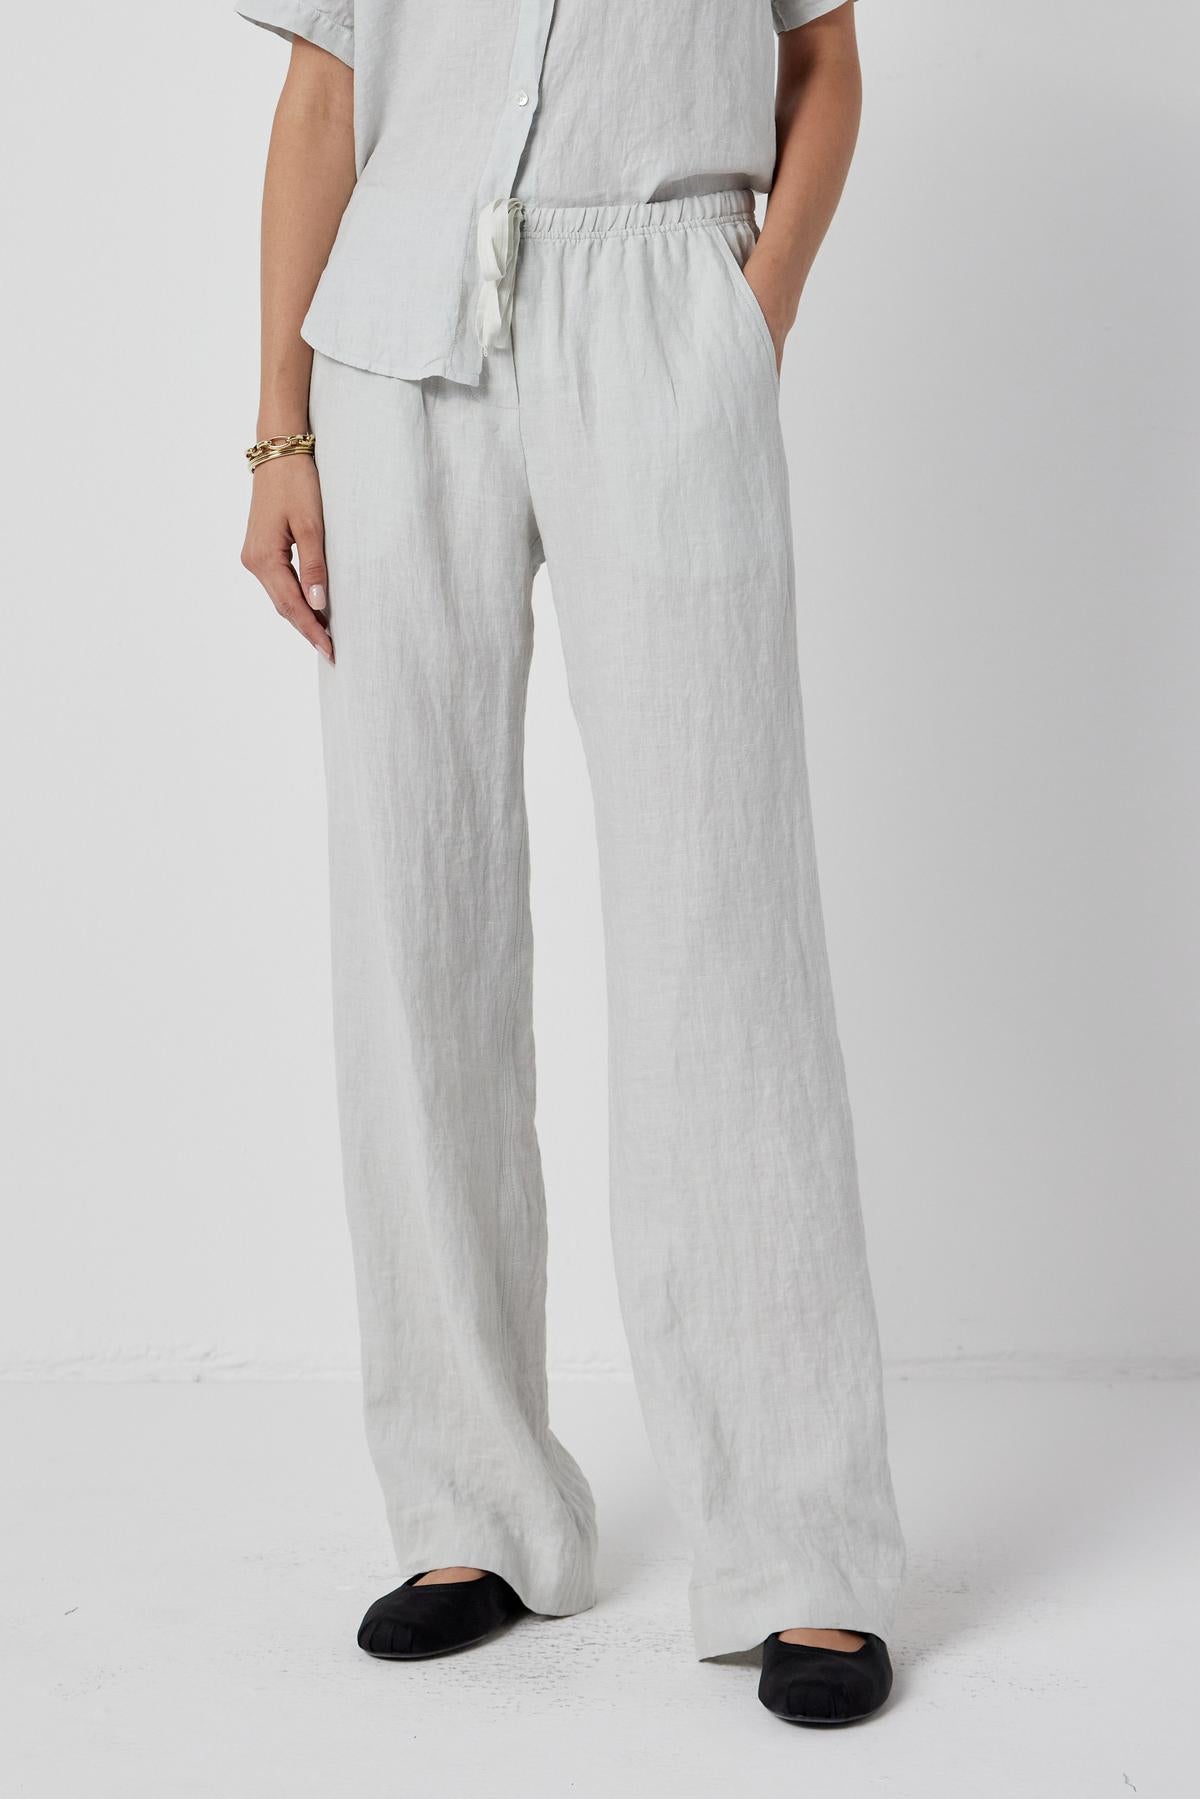 Woman wearing Velvet by Jenny Graham PICO LINEN PANT with an elastic waist and a tucked-in short-sleeve blouse, completed with black flat shoes, against a white background.-36168821276865